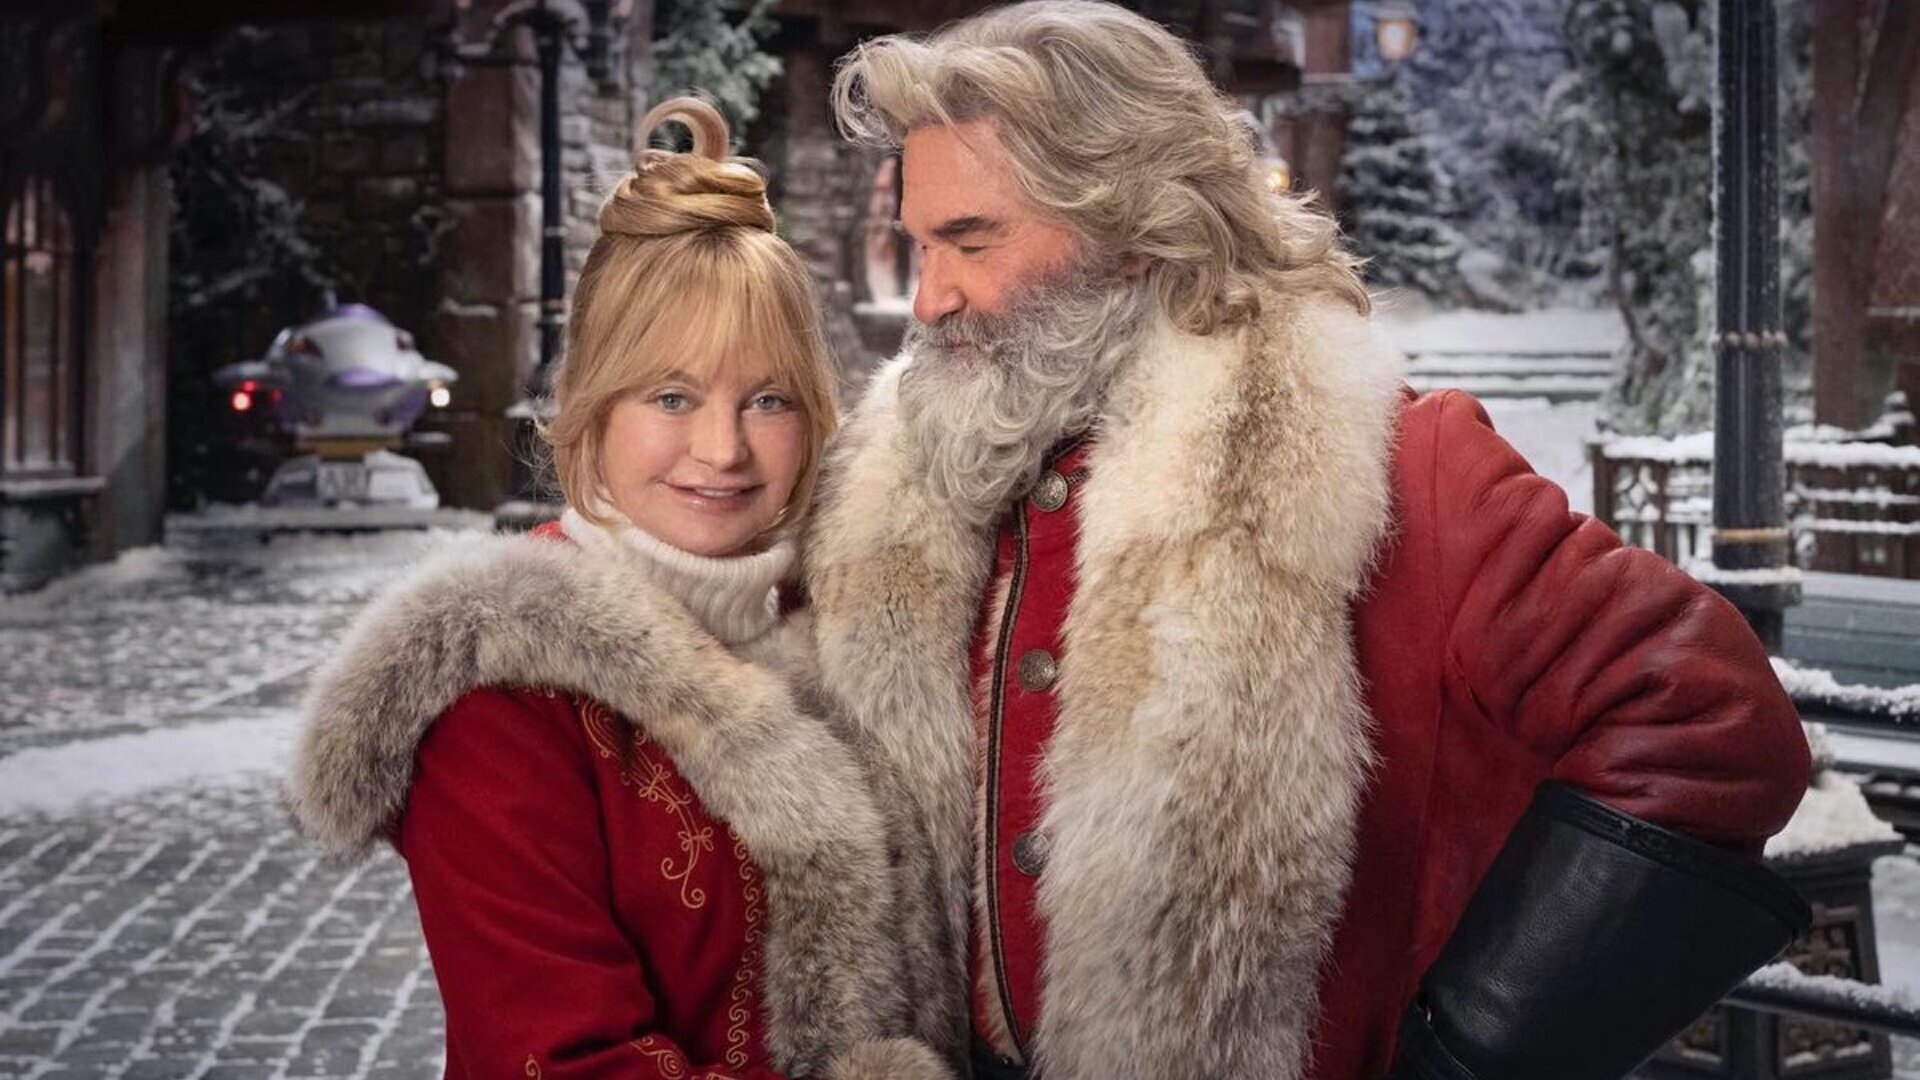 New Trailer For Kurt Russell's Santa Claus Movie THE CHRISTMAS